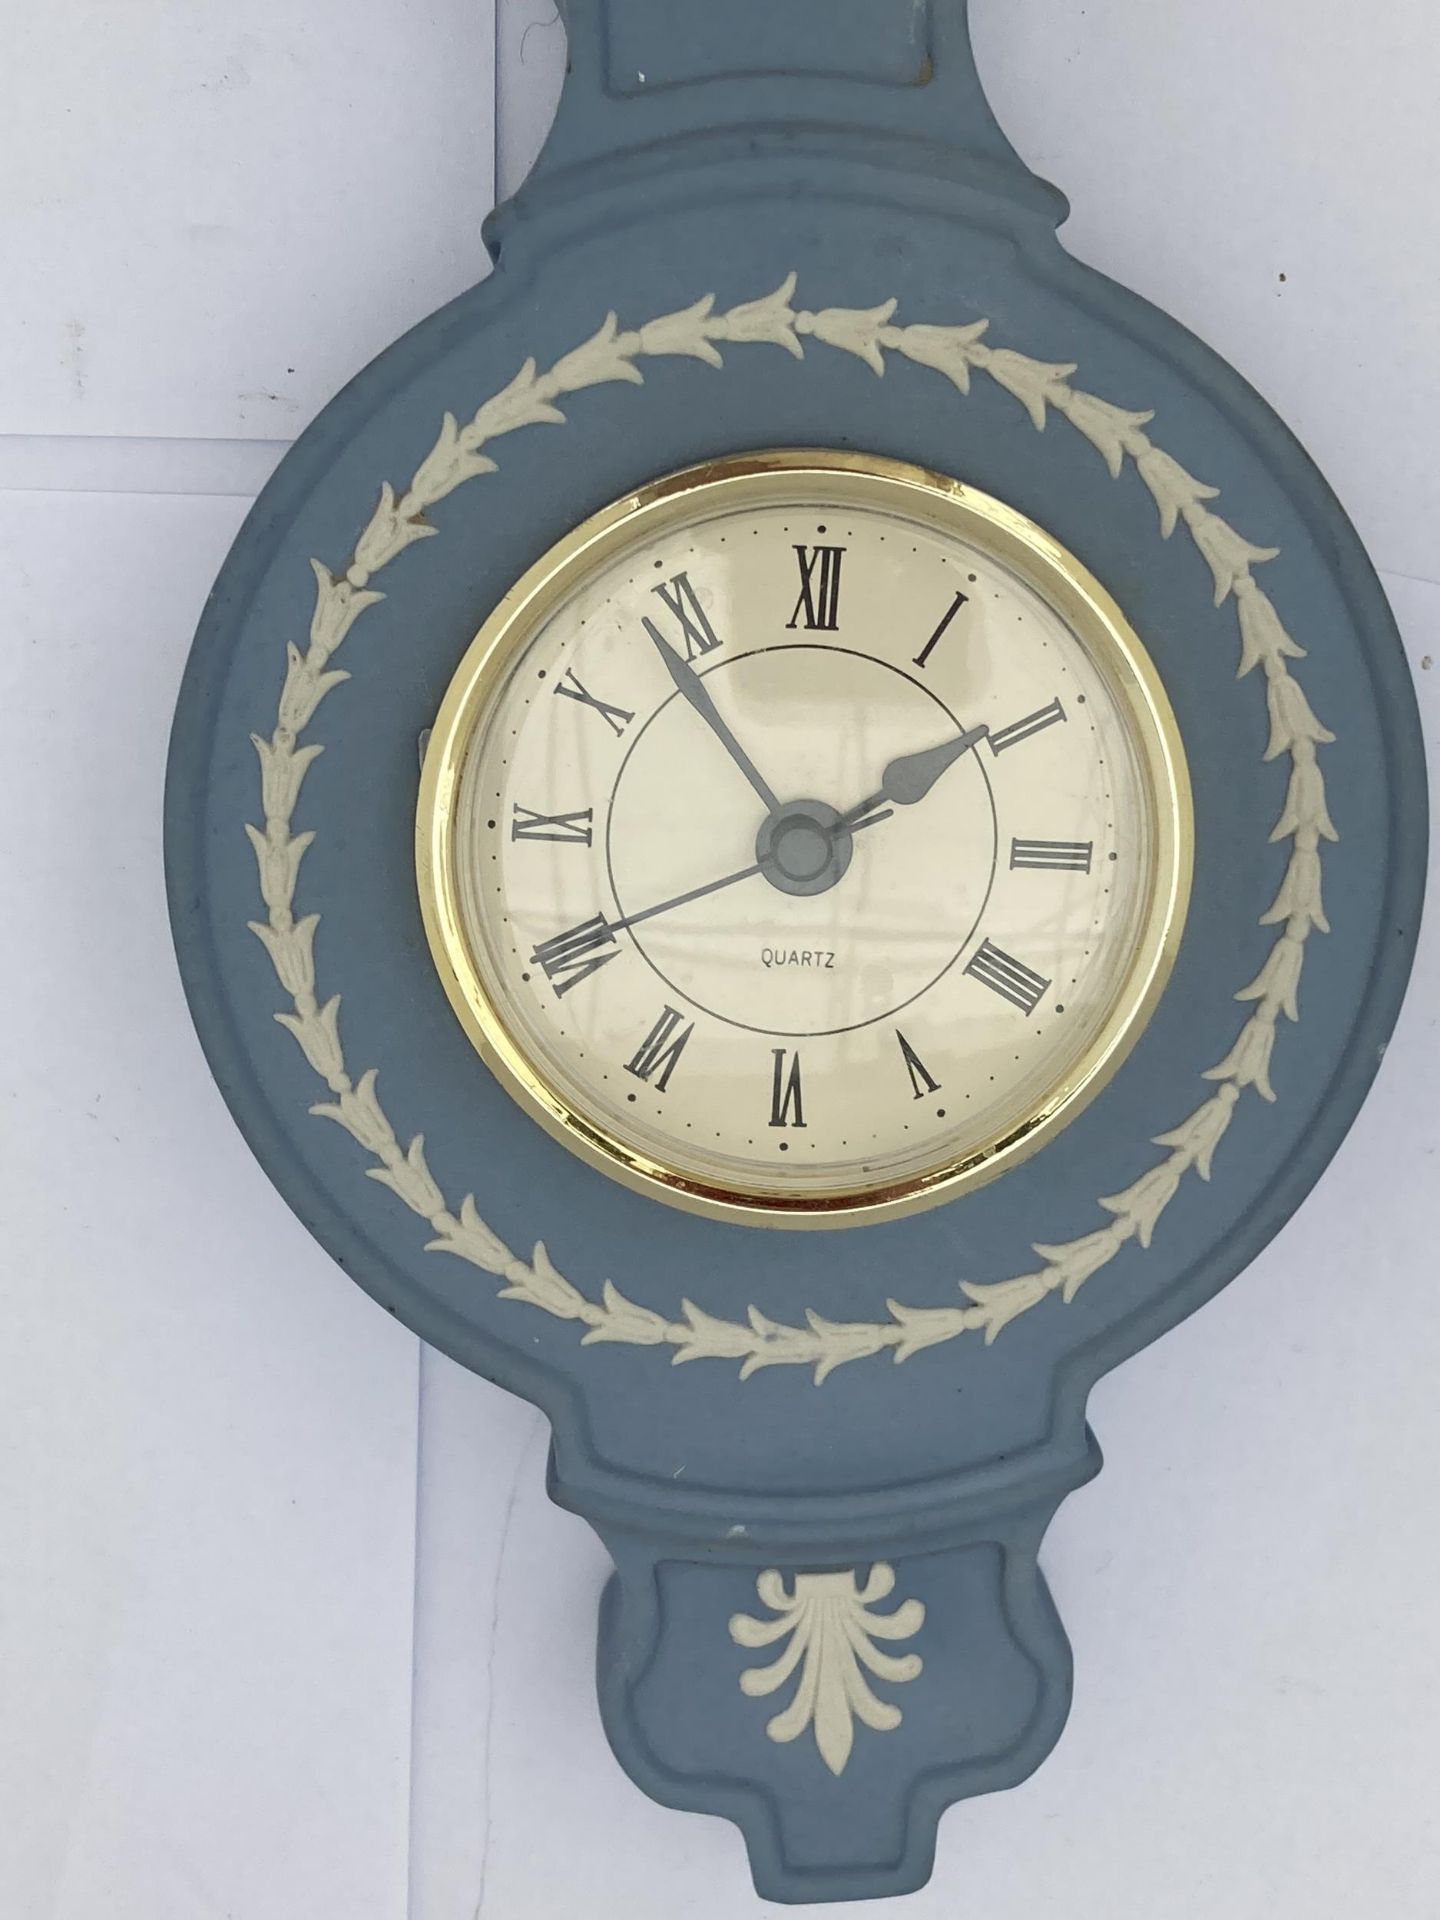 A WEDGWOOD PALE BLUE JASPERWARE CLOCK IN THE FORM OF A BAROMETER - Image 4 of 4